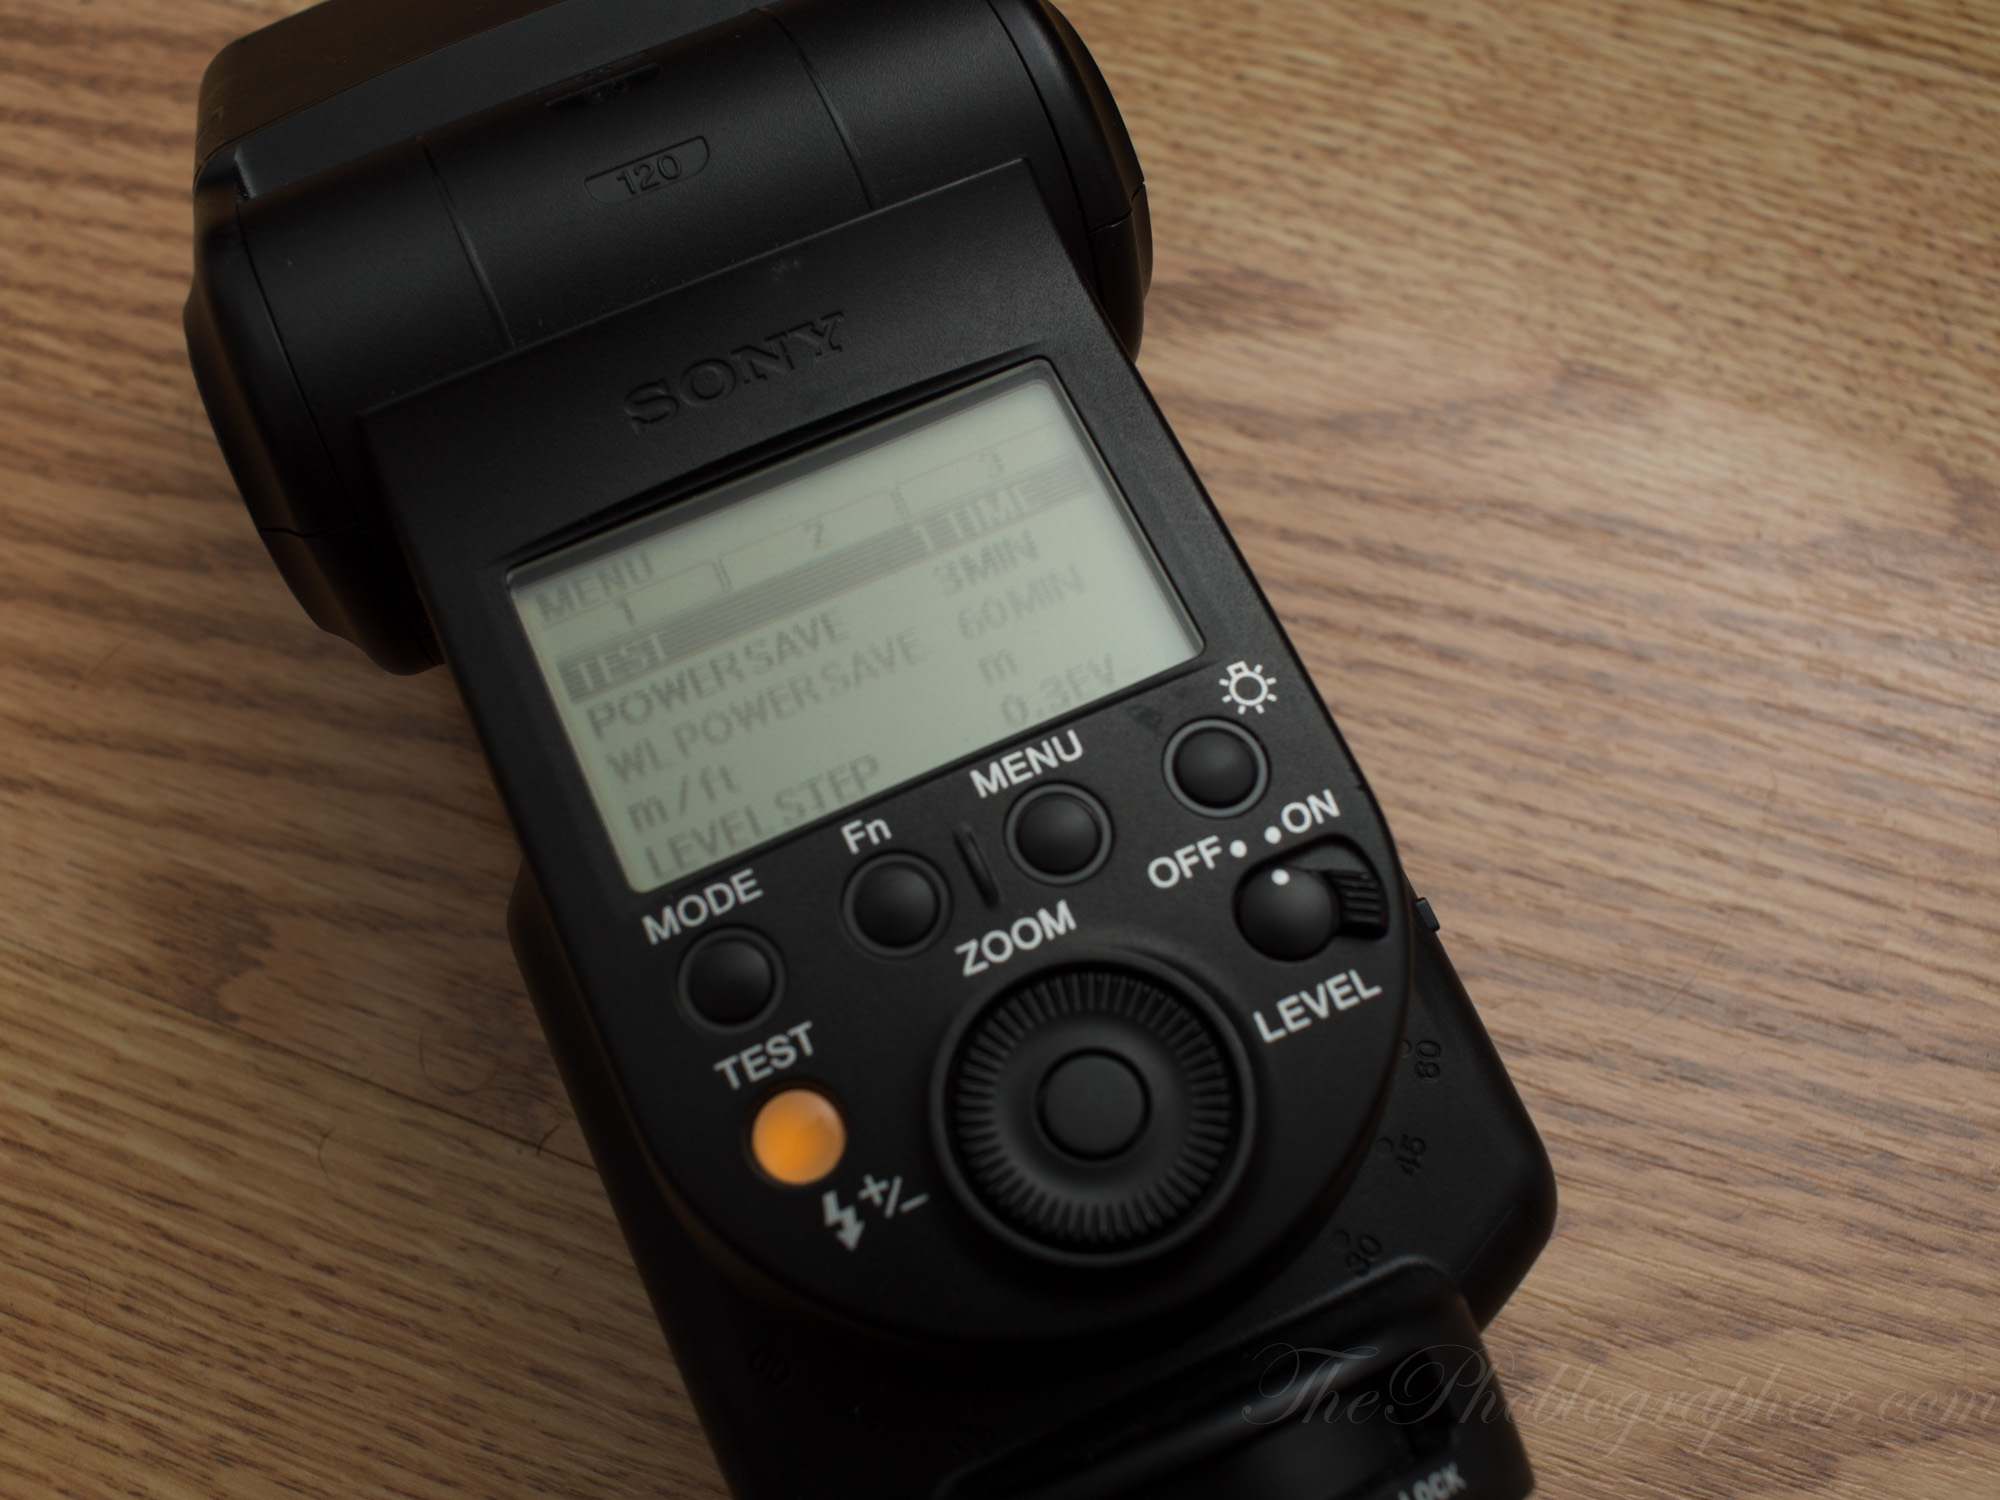 Review: Sony HVL-F60M Flash - The Phoblographer